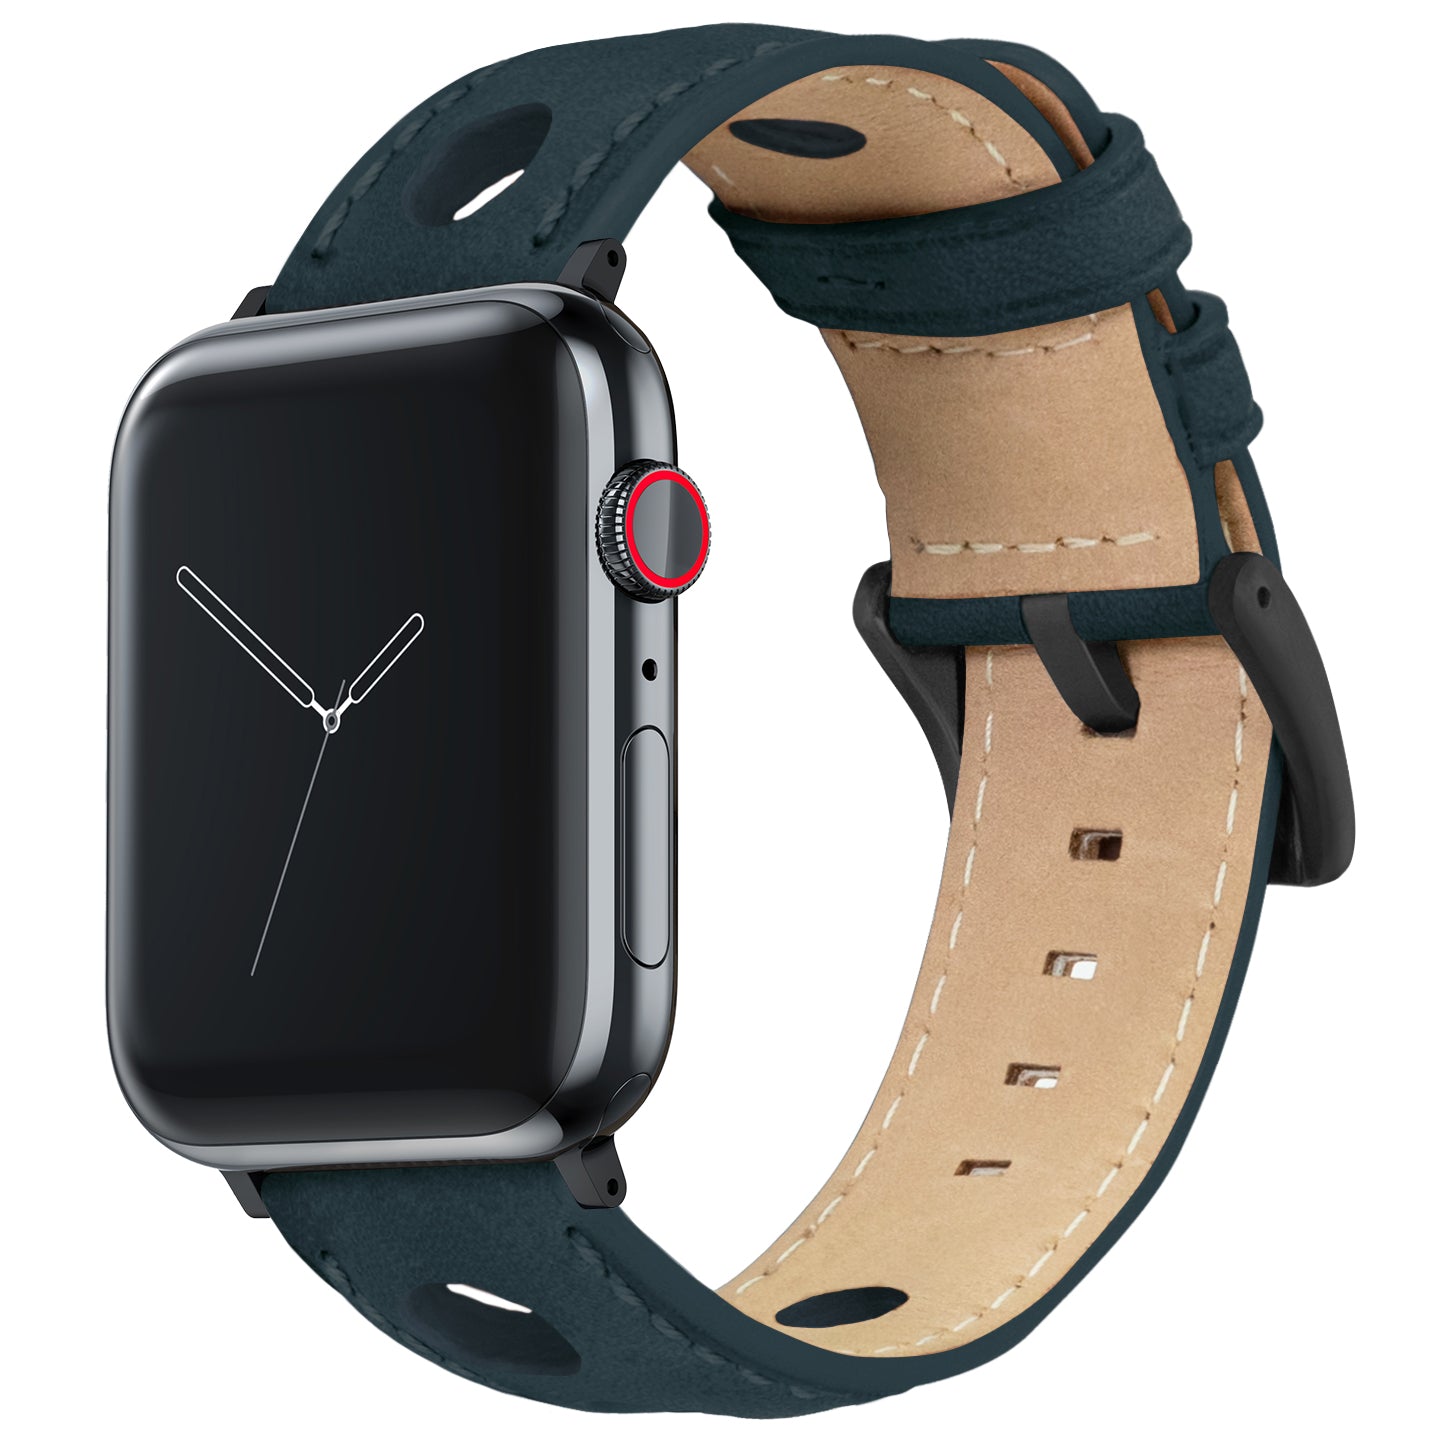 Apple Watch | Navy Blue Rally Horween Leather - Barton Watch Bands